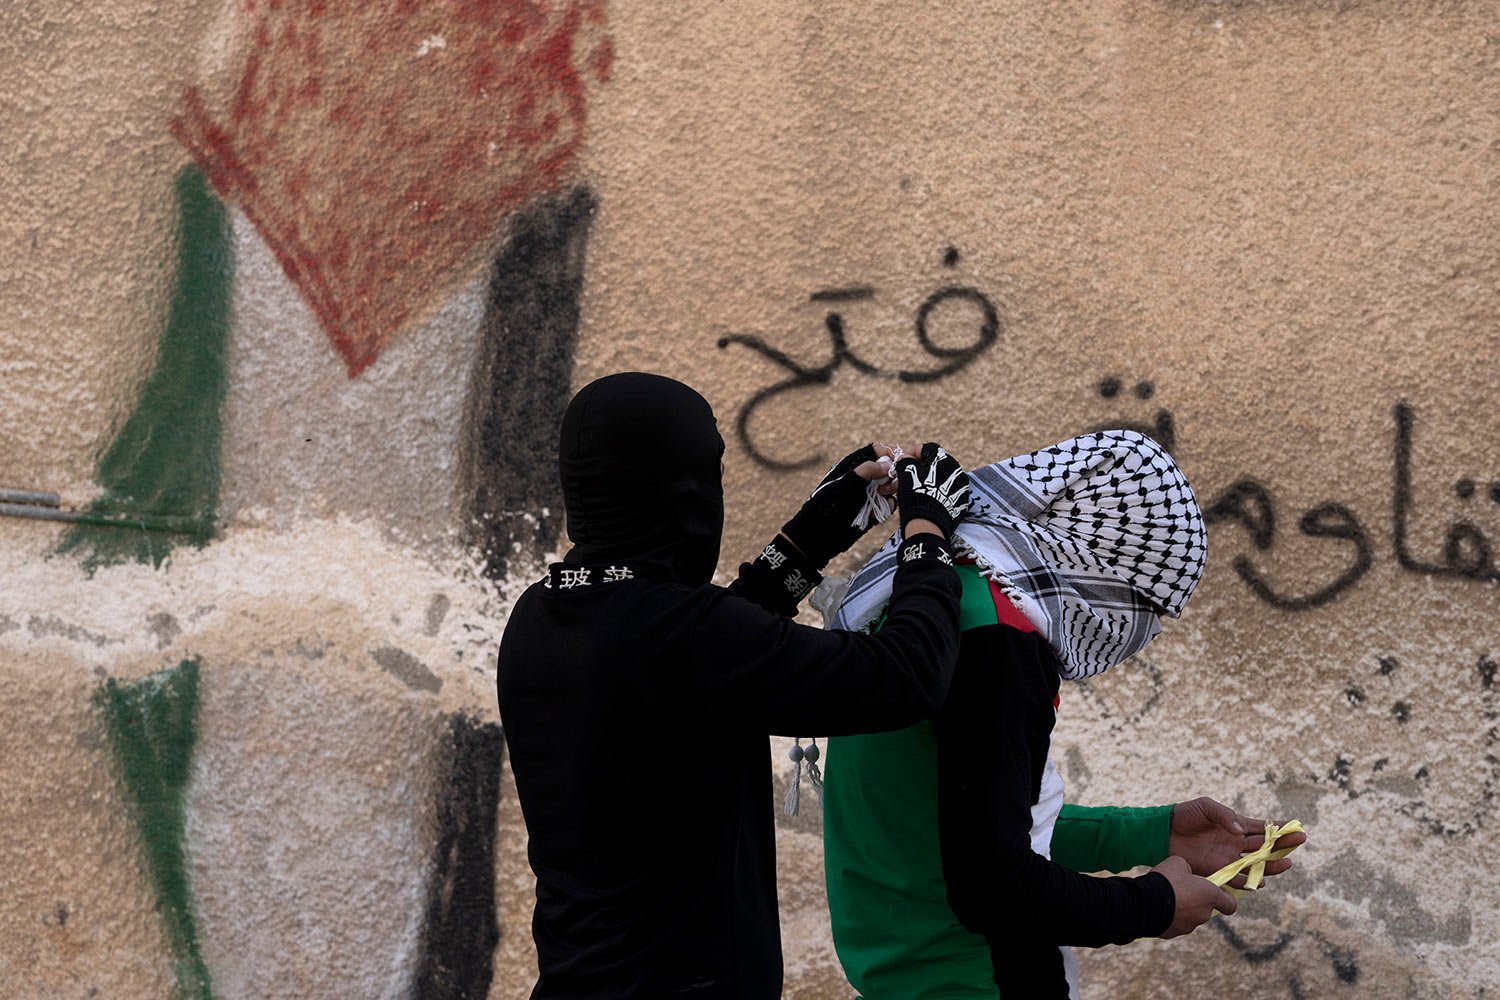  A Palestinian youth assists his friend to tie his scarf before a weekly protest in the West Bank town of Kfar Qaddum, Friday, Jan. 13, 2023. (AP Photo/ Maya Alleruzzo) 